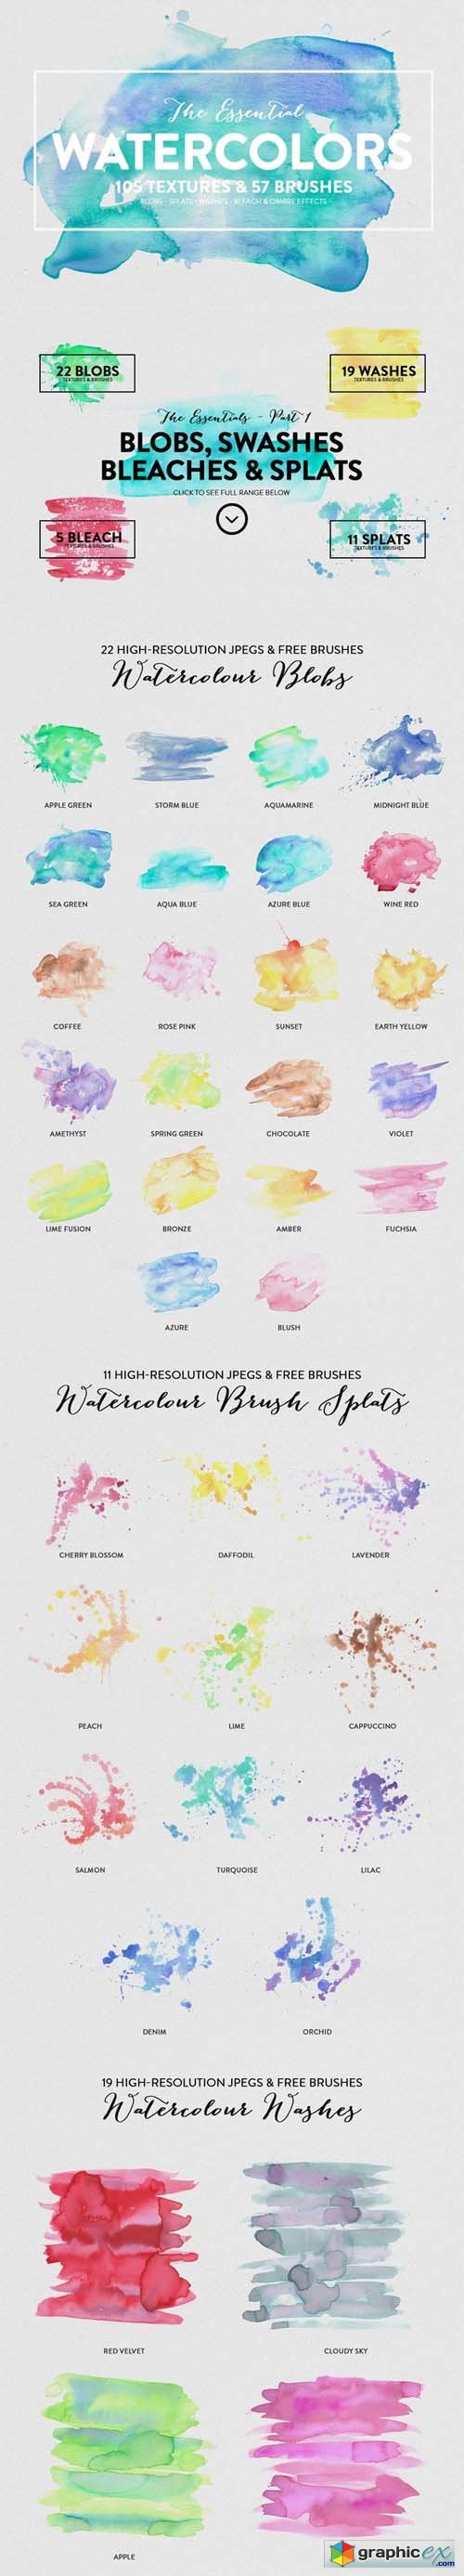 The Essential Watercolors